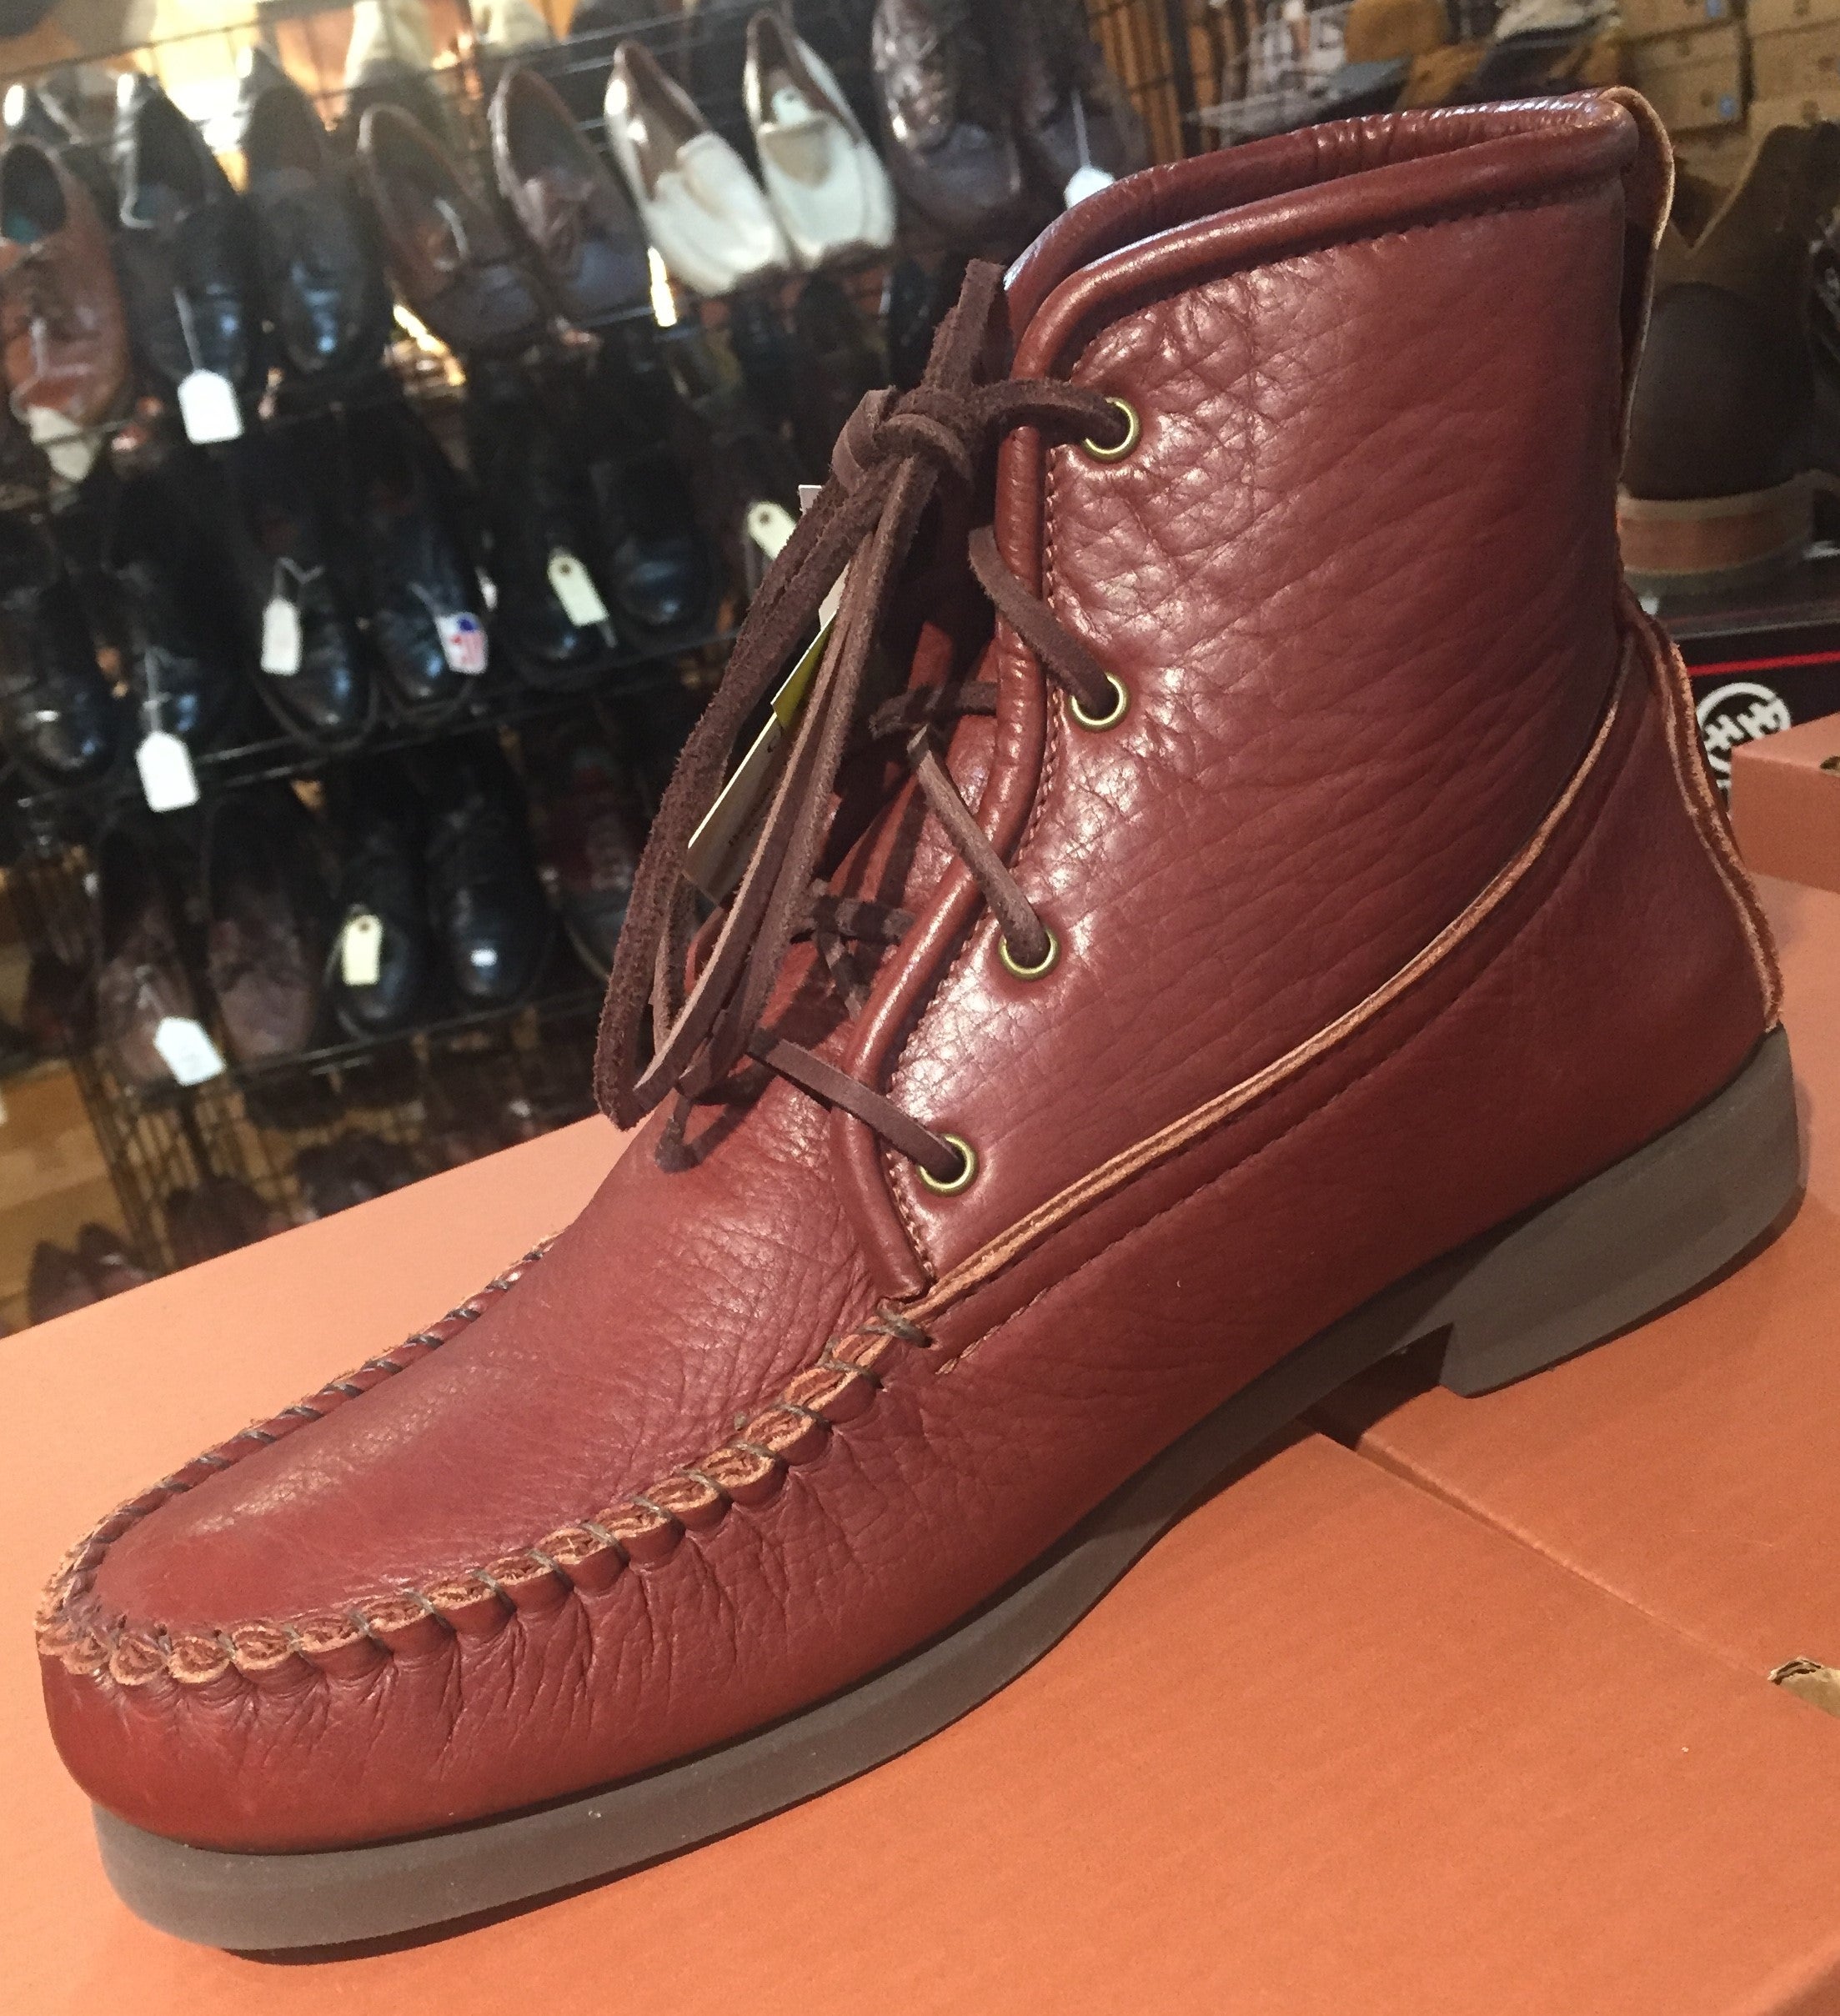 Footskins "Herd Wear" Bison Leather Chukka boots.  B 4540